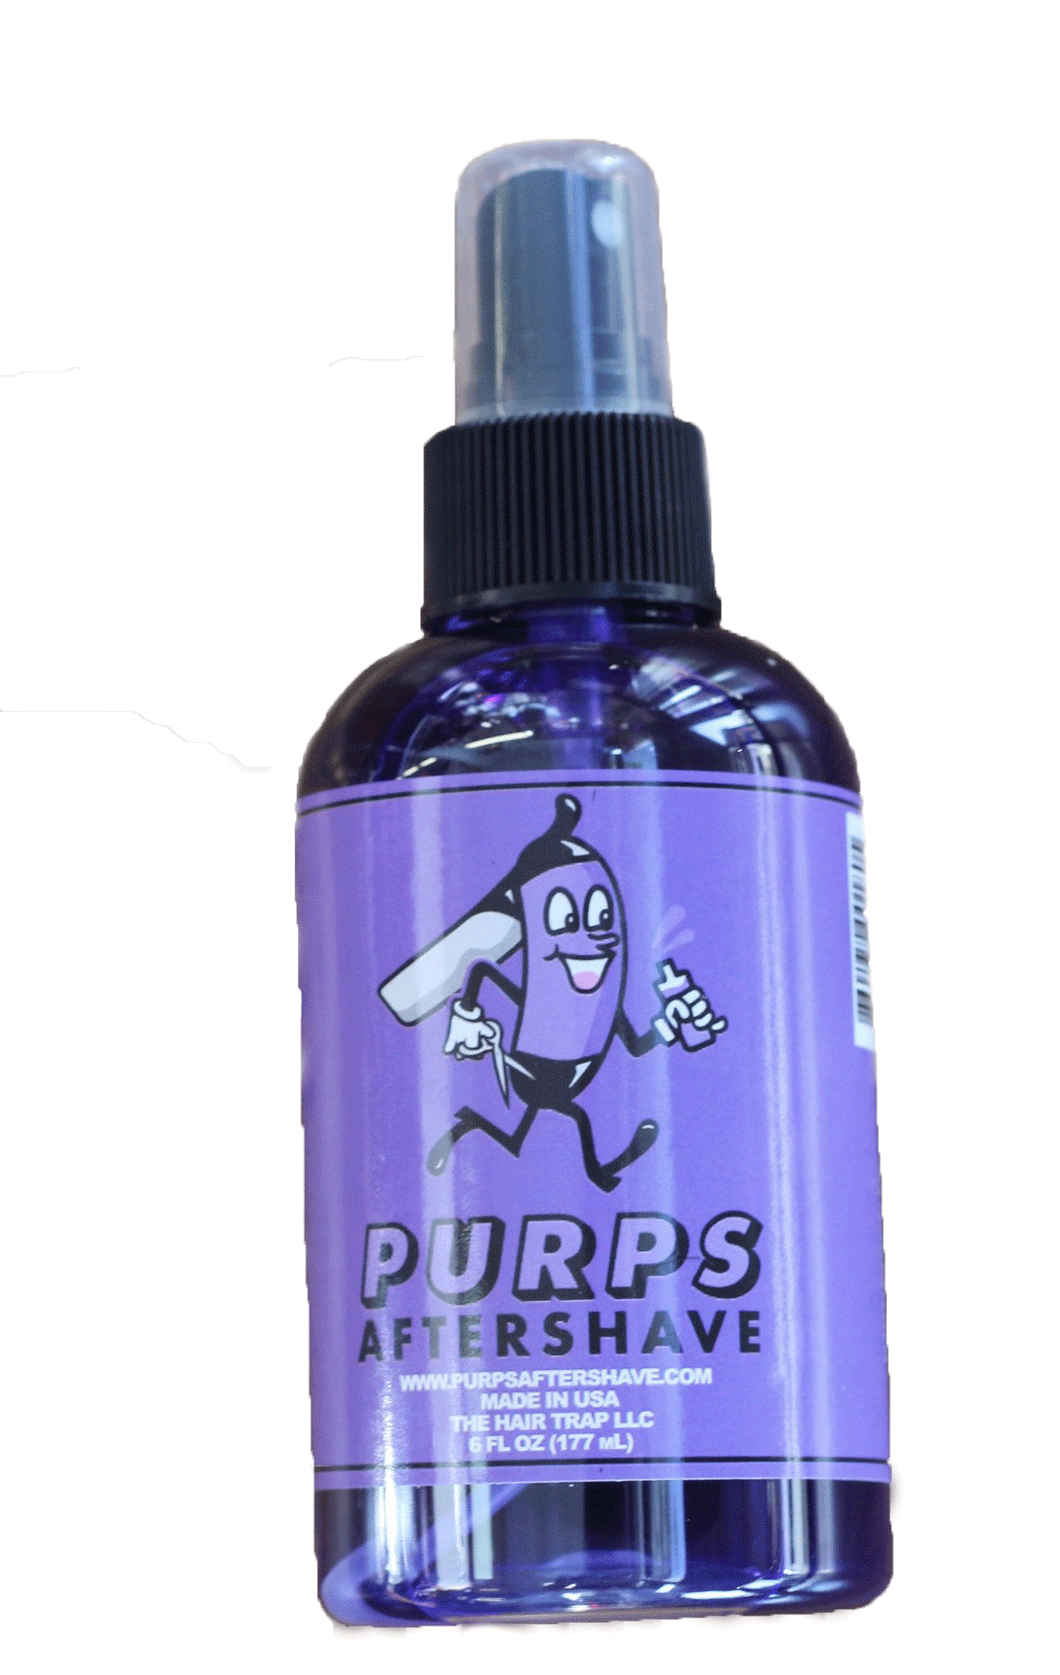 Purps Aftershave Spray 6oz